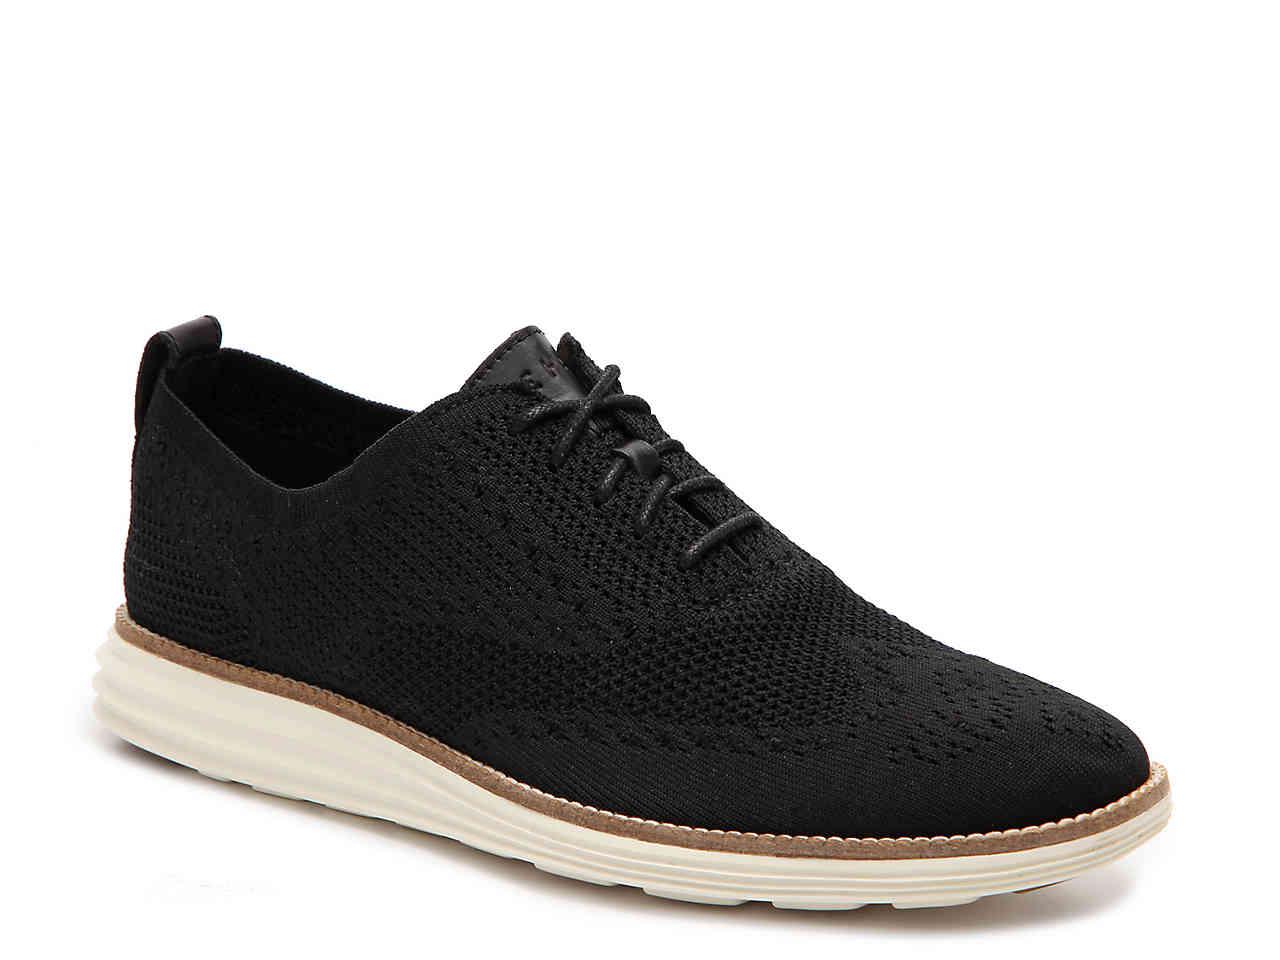 Cole Haan Synthetic Original Grand Stitchlite Wingtip Oxford in Black ...